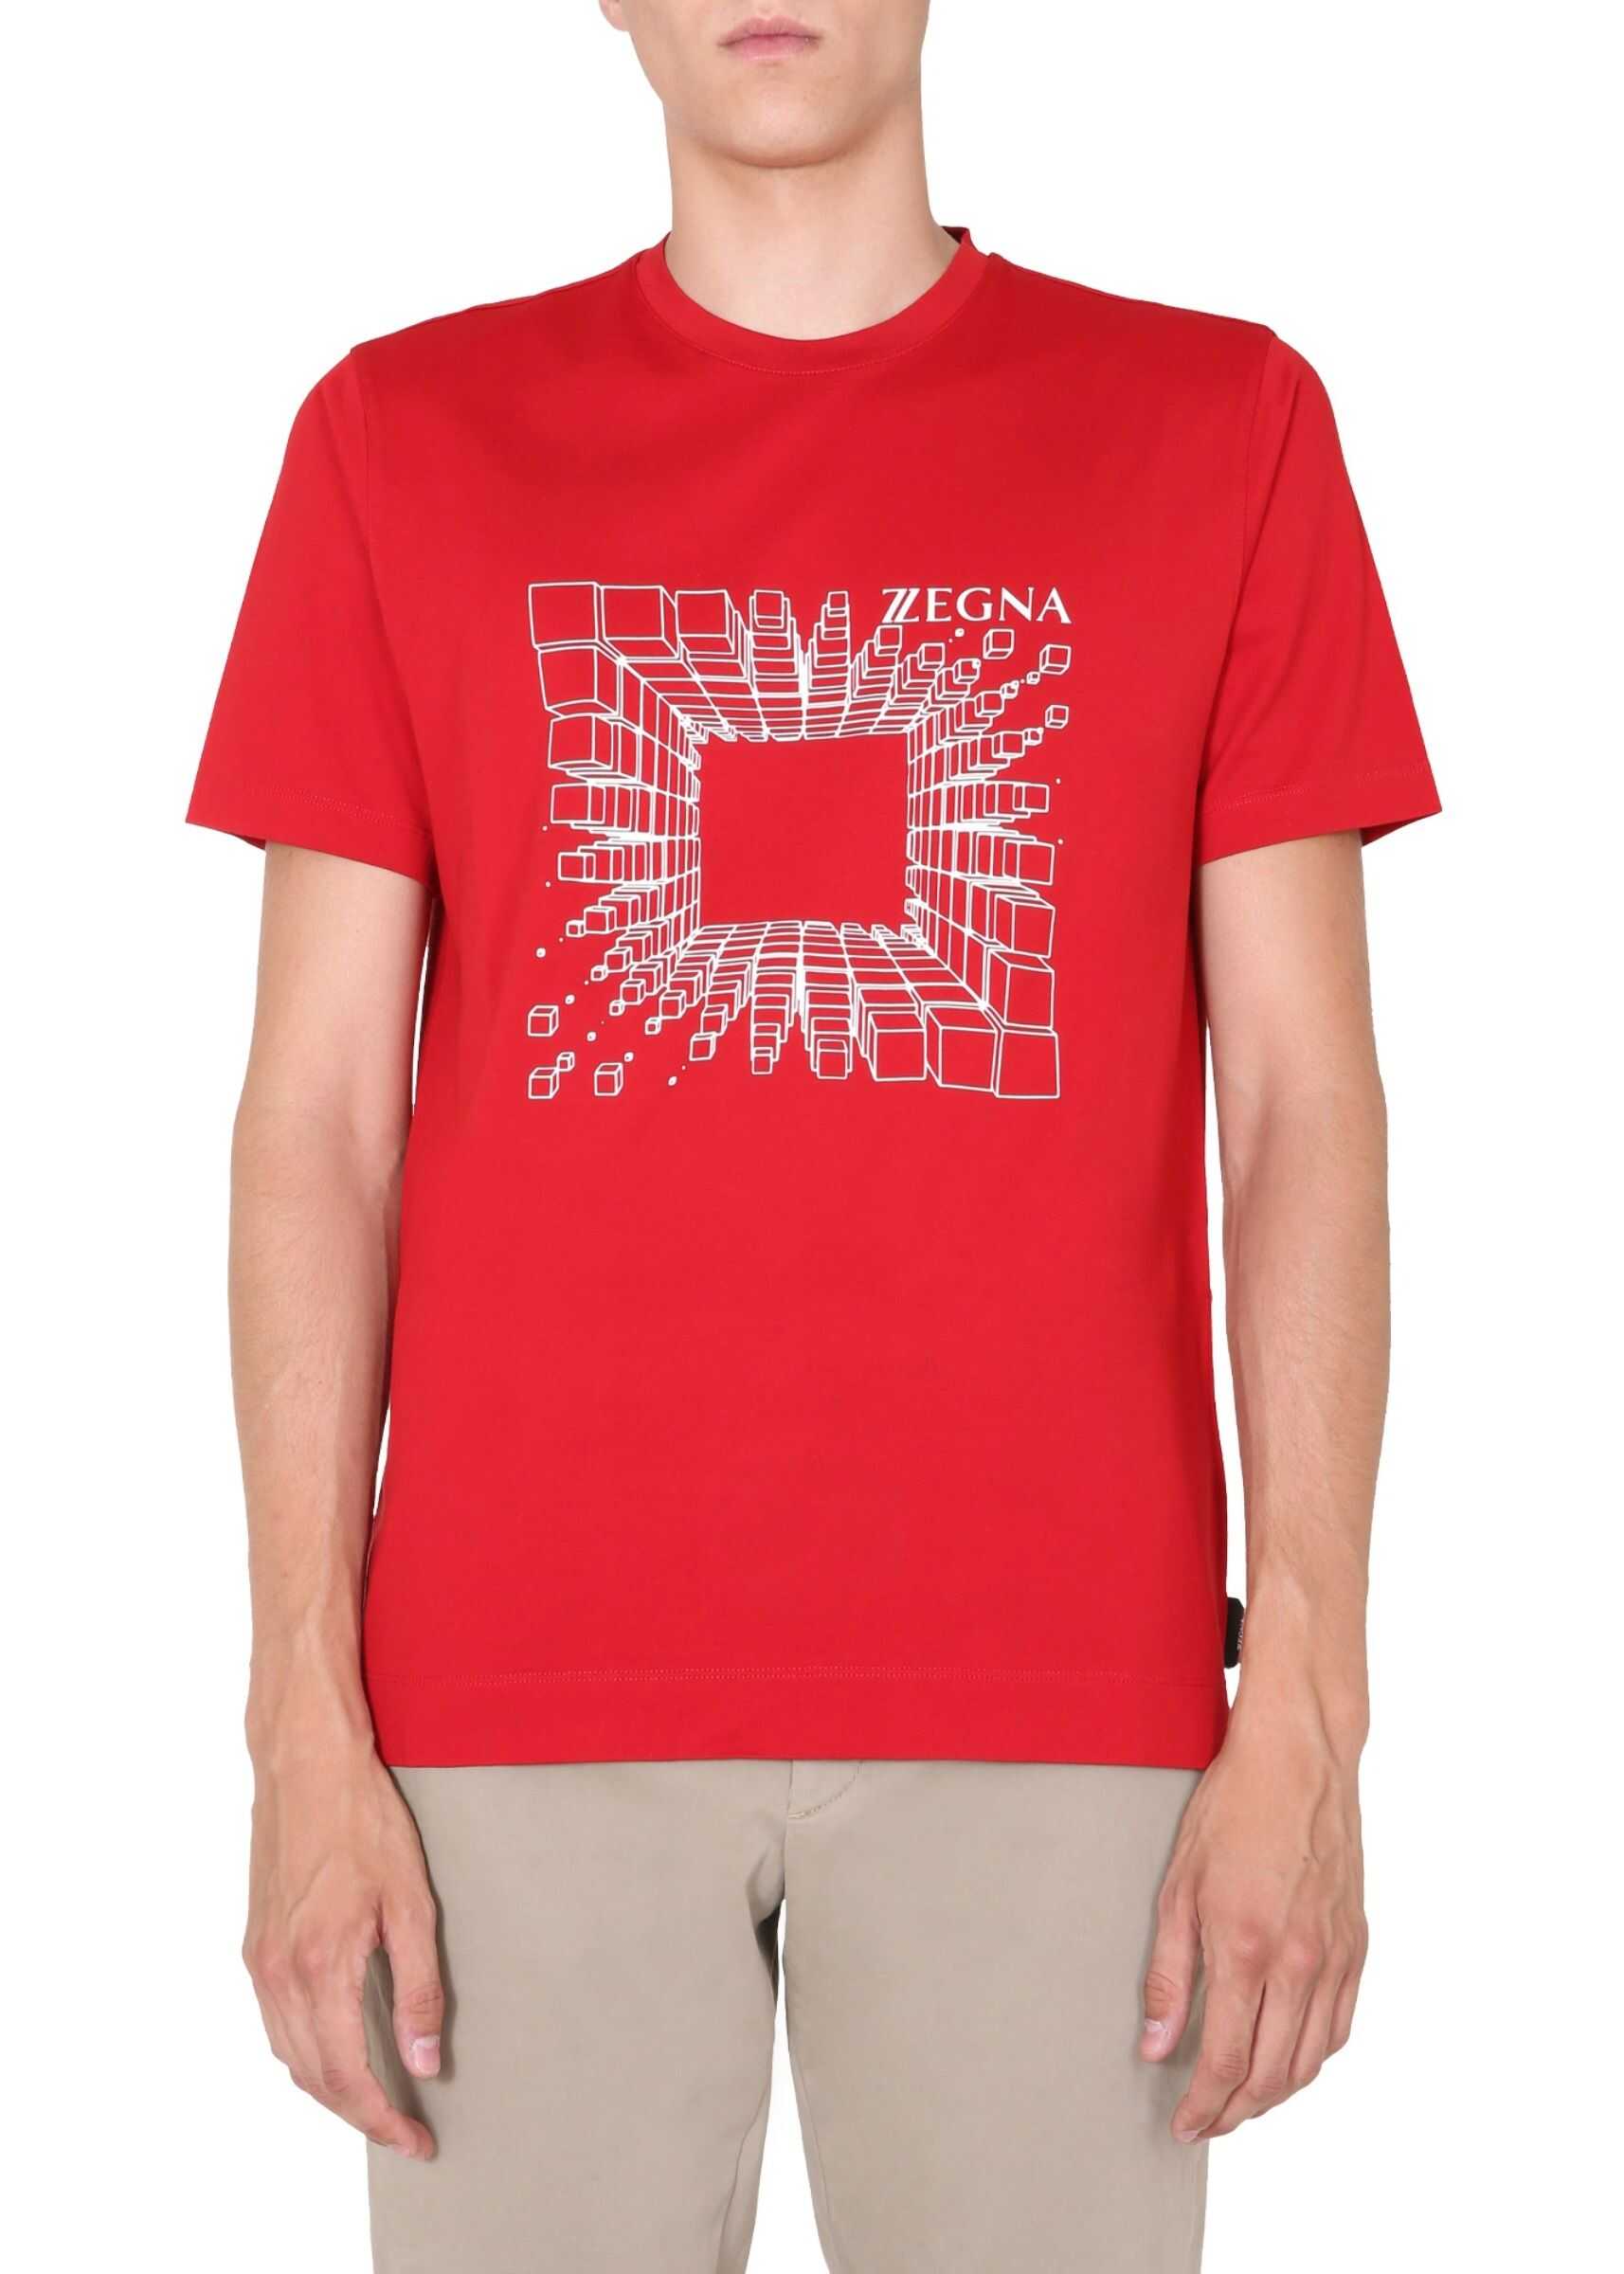 Z Zegna Slim Fit T-Shirt RED